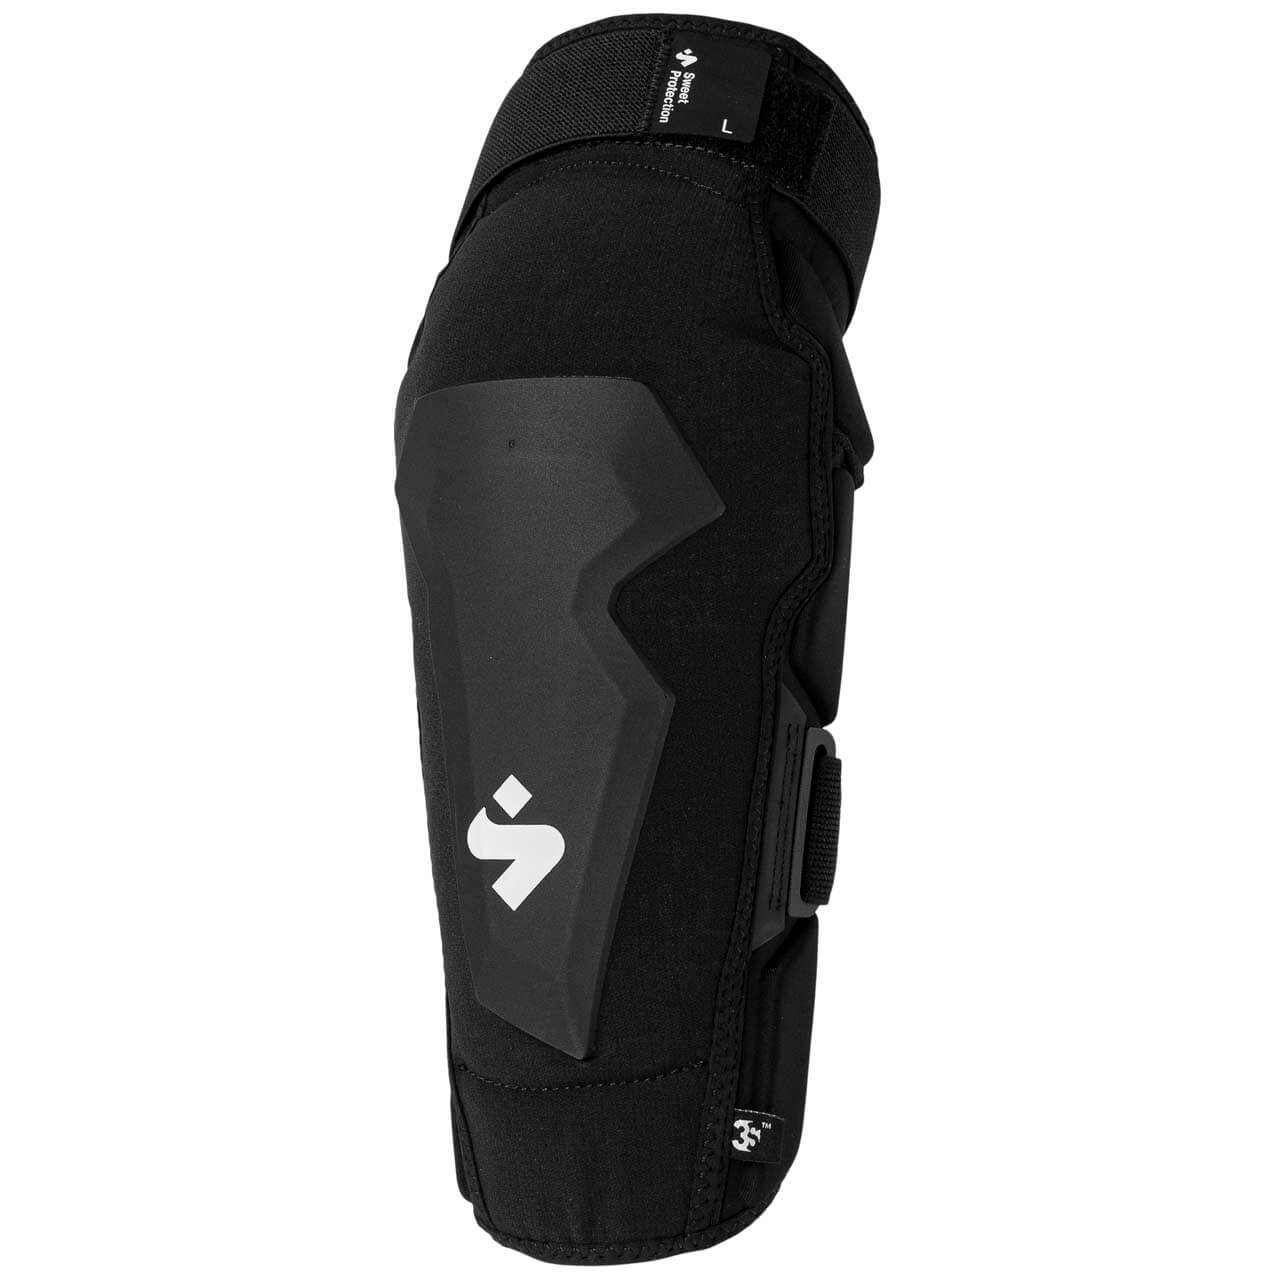 Sweet Protection Knee Guards Pro - Black, L von Sweet Protection}